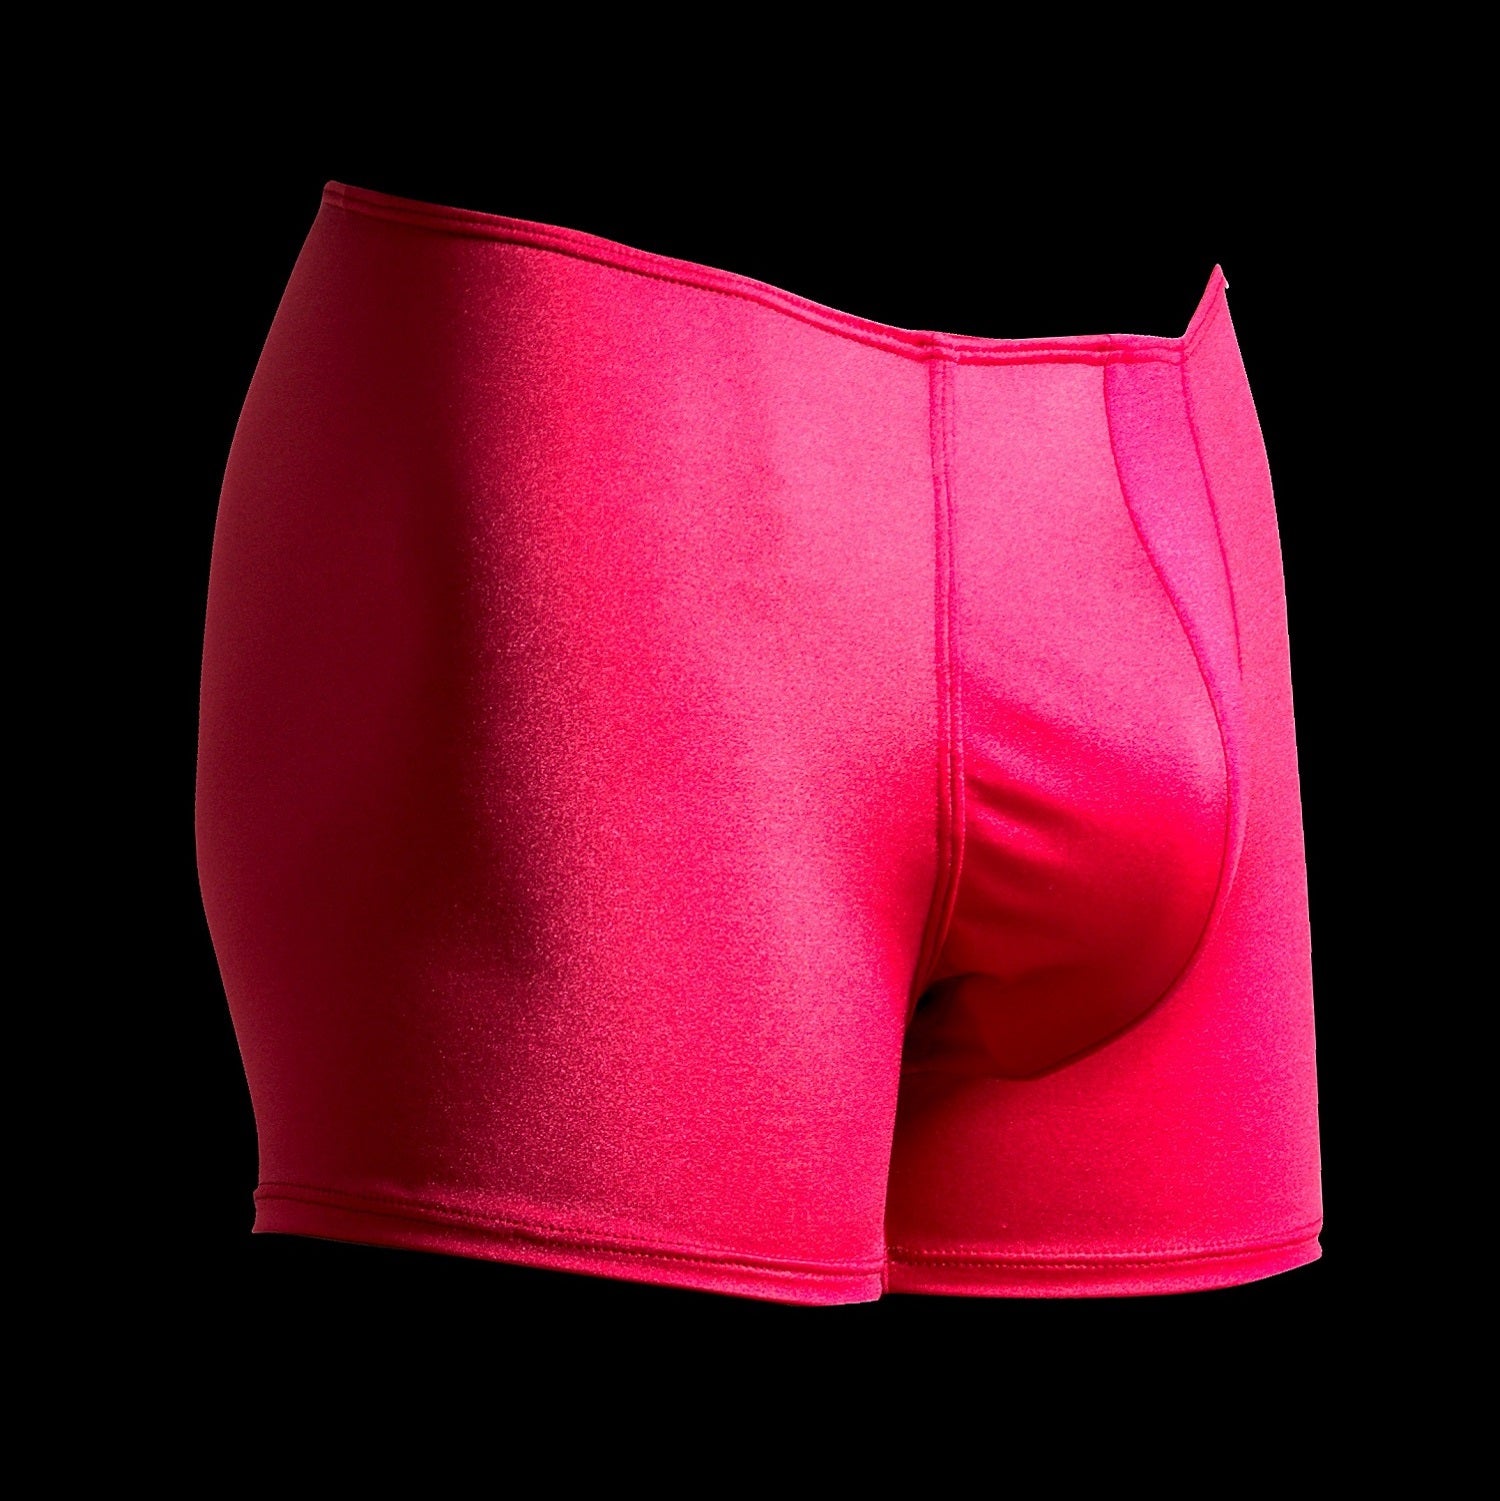 The Etseo Reflex Boxer Brief Red is part of the Etseo Reflex Men's Underwear Collection of Boxer Briefs and Bikini Tangas. Etseo Reflex is an elegant and comfortable collection of products made of a glossy elastic fabric that allows a good fit to the body. At Etseo we manufacture quality men's underwear.